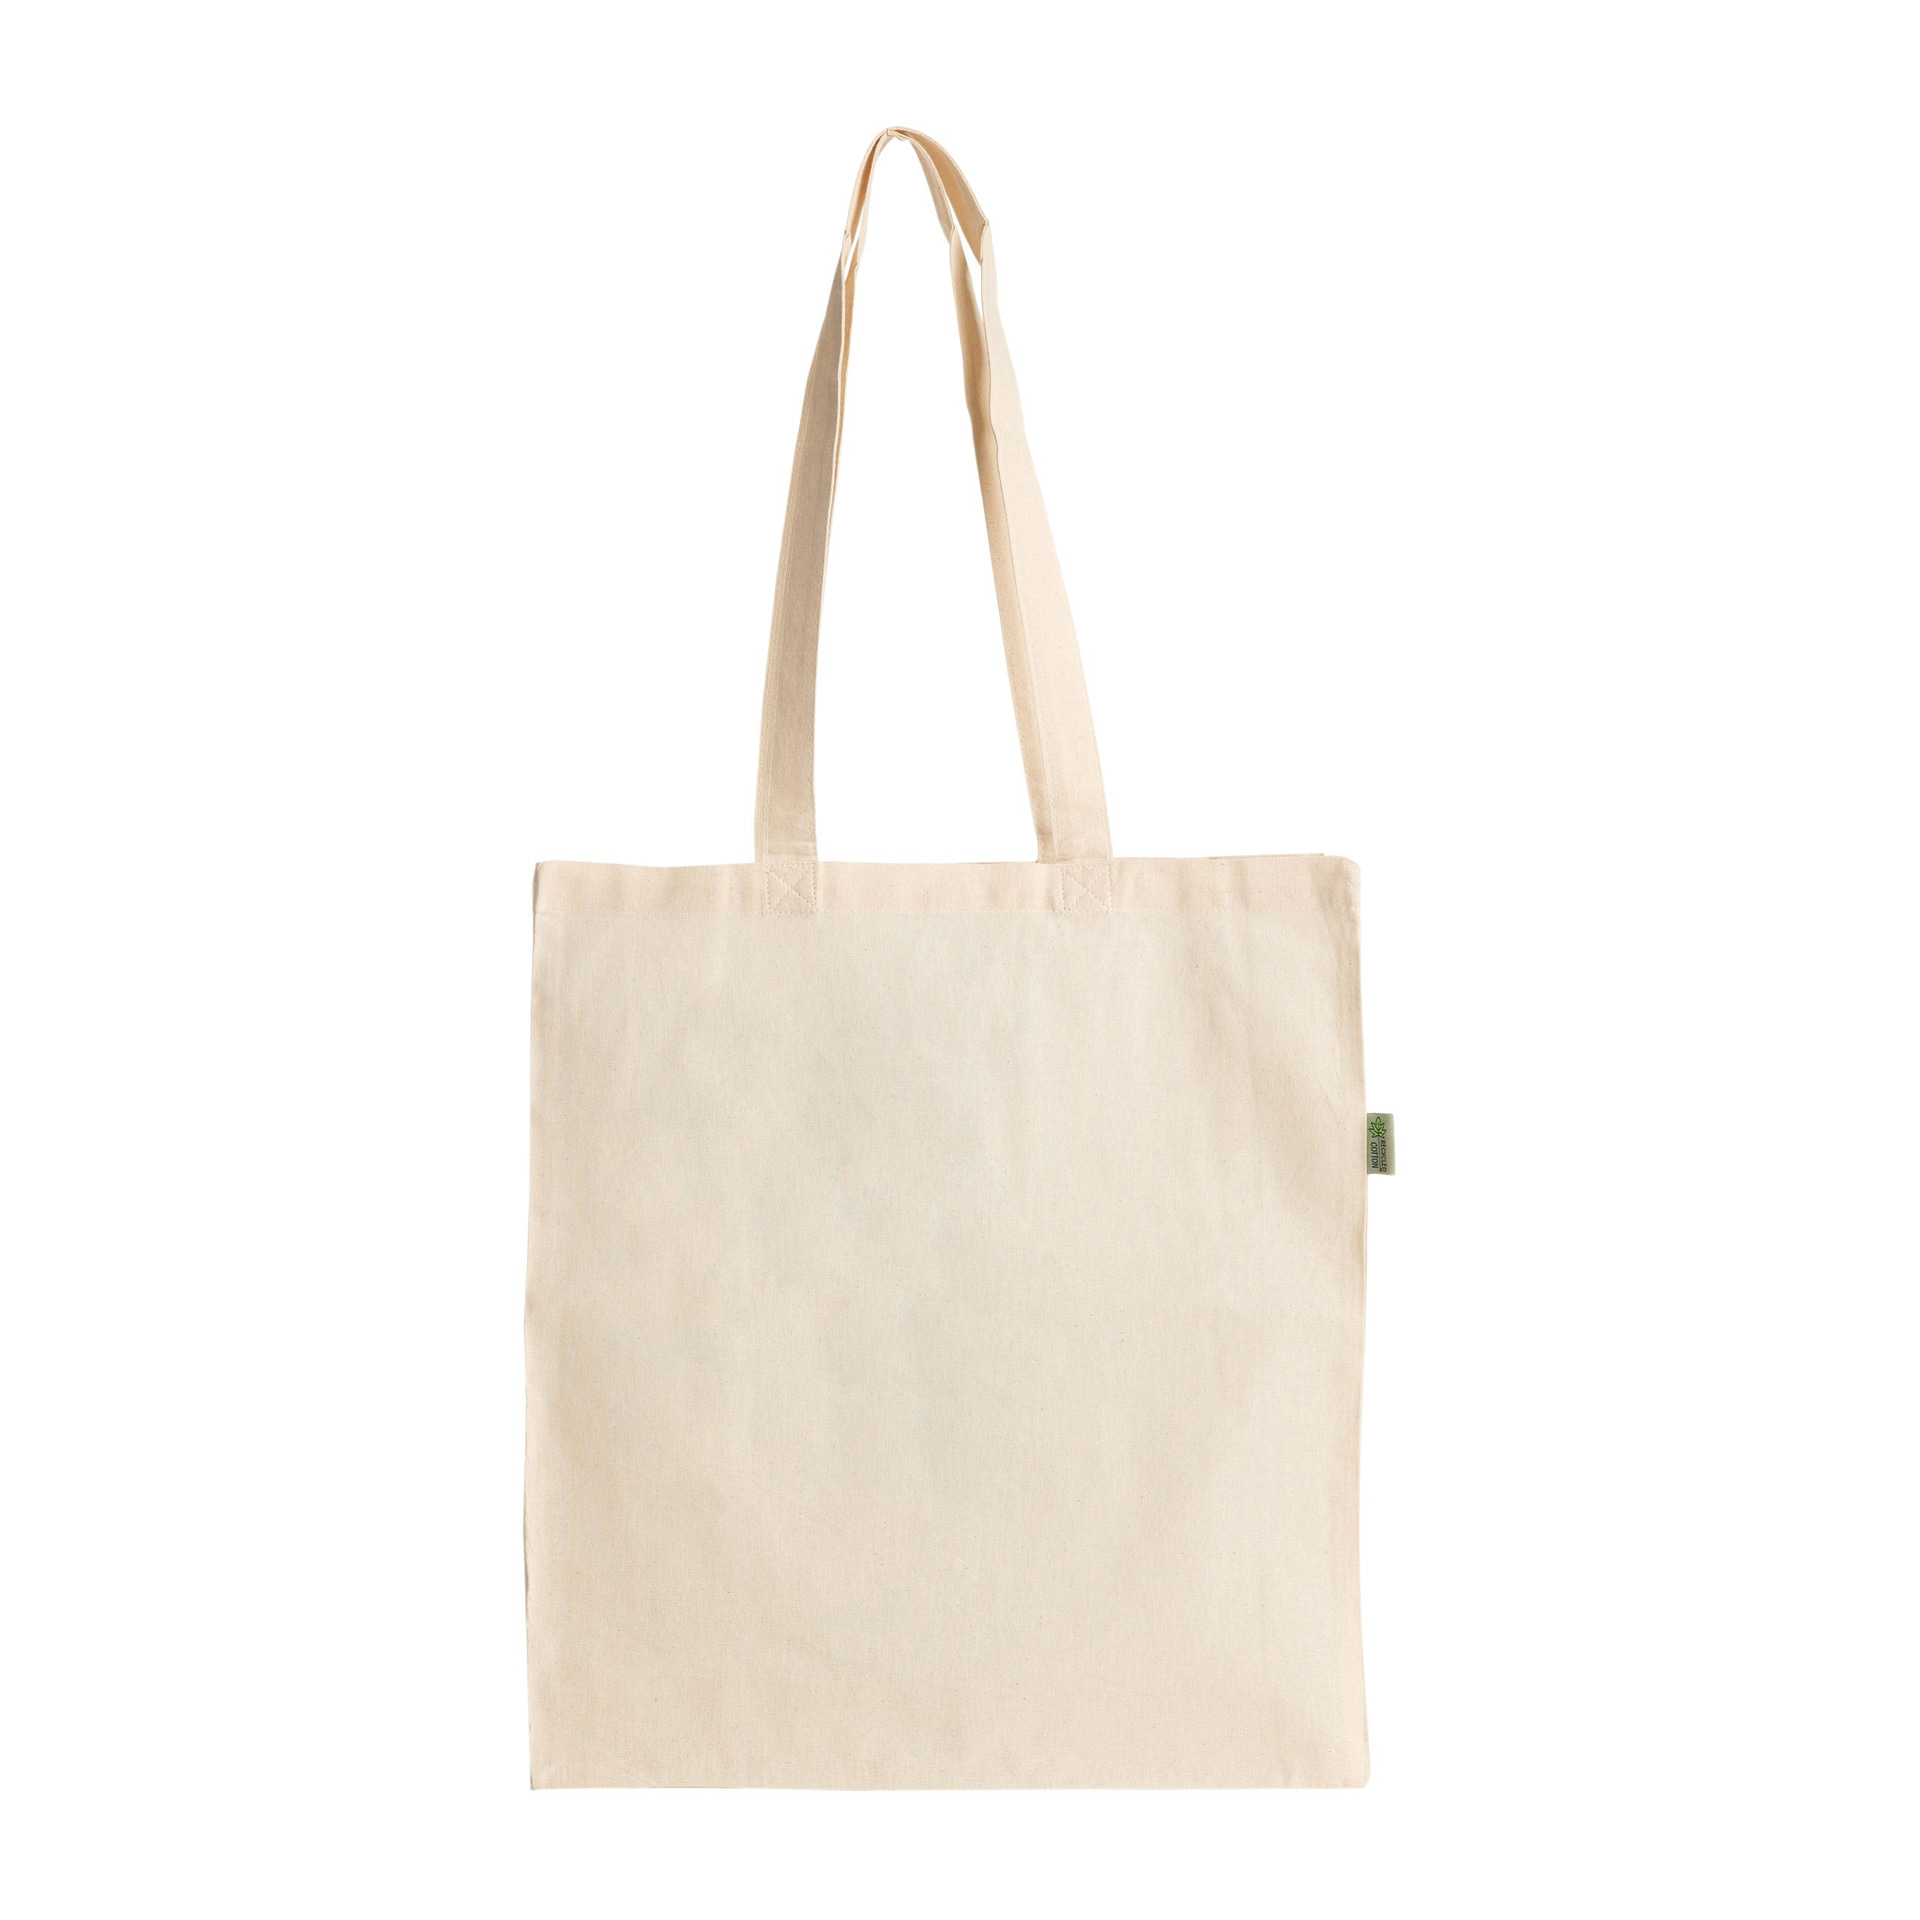 Invincible 5oz Recycled Cotton Tote Shopper